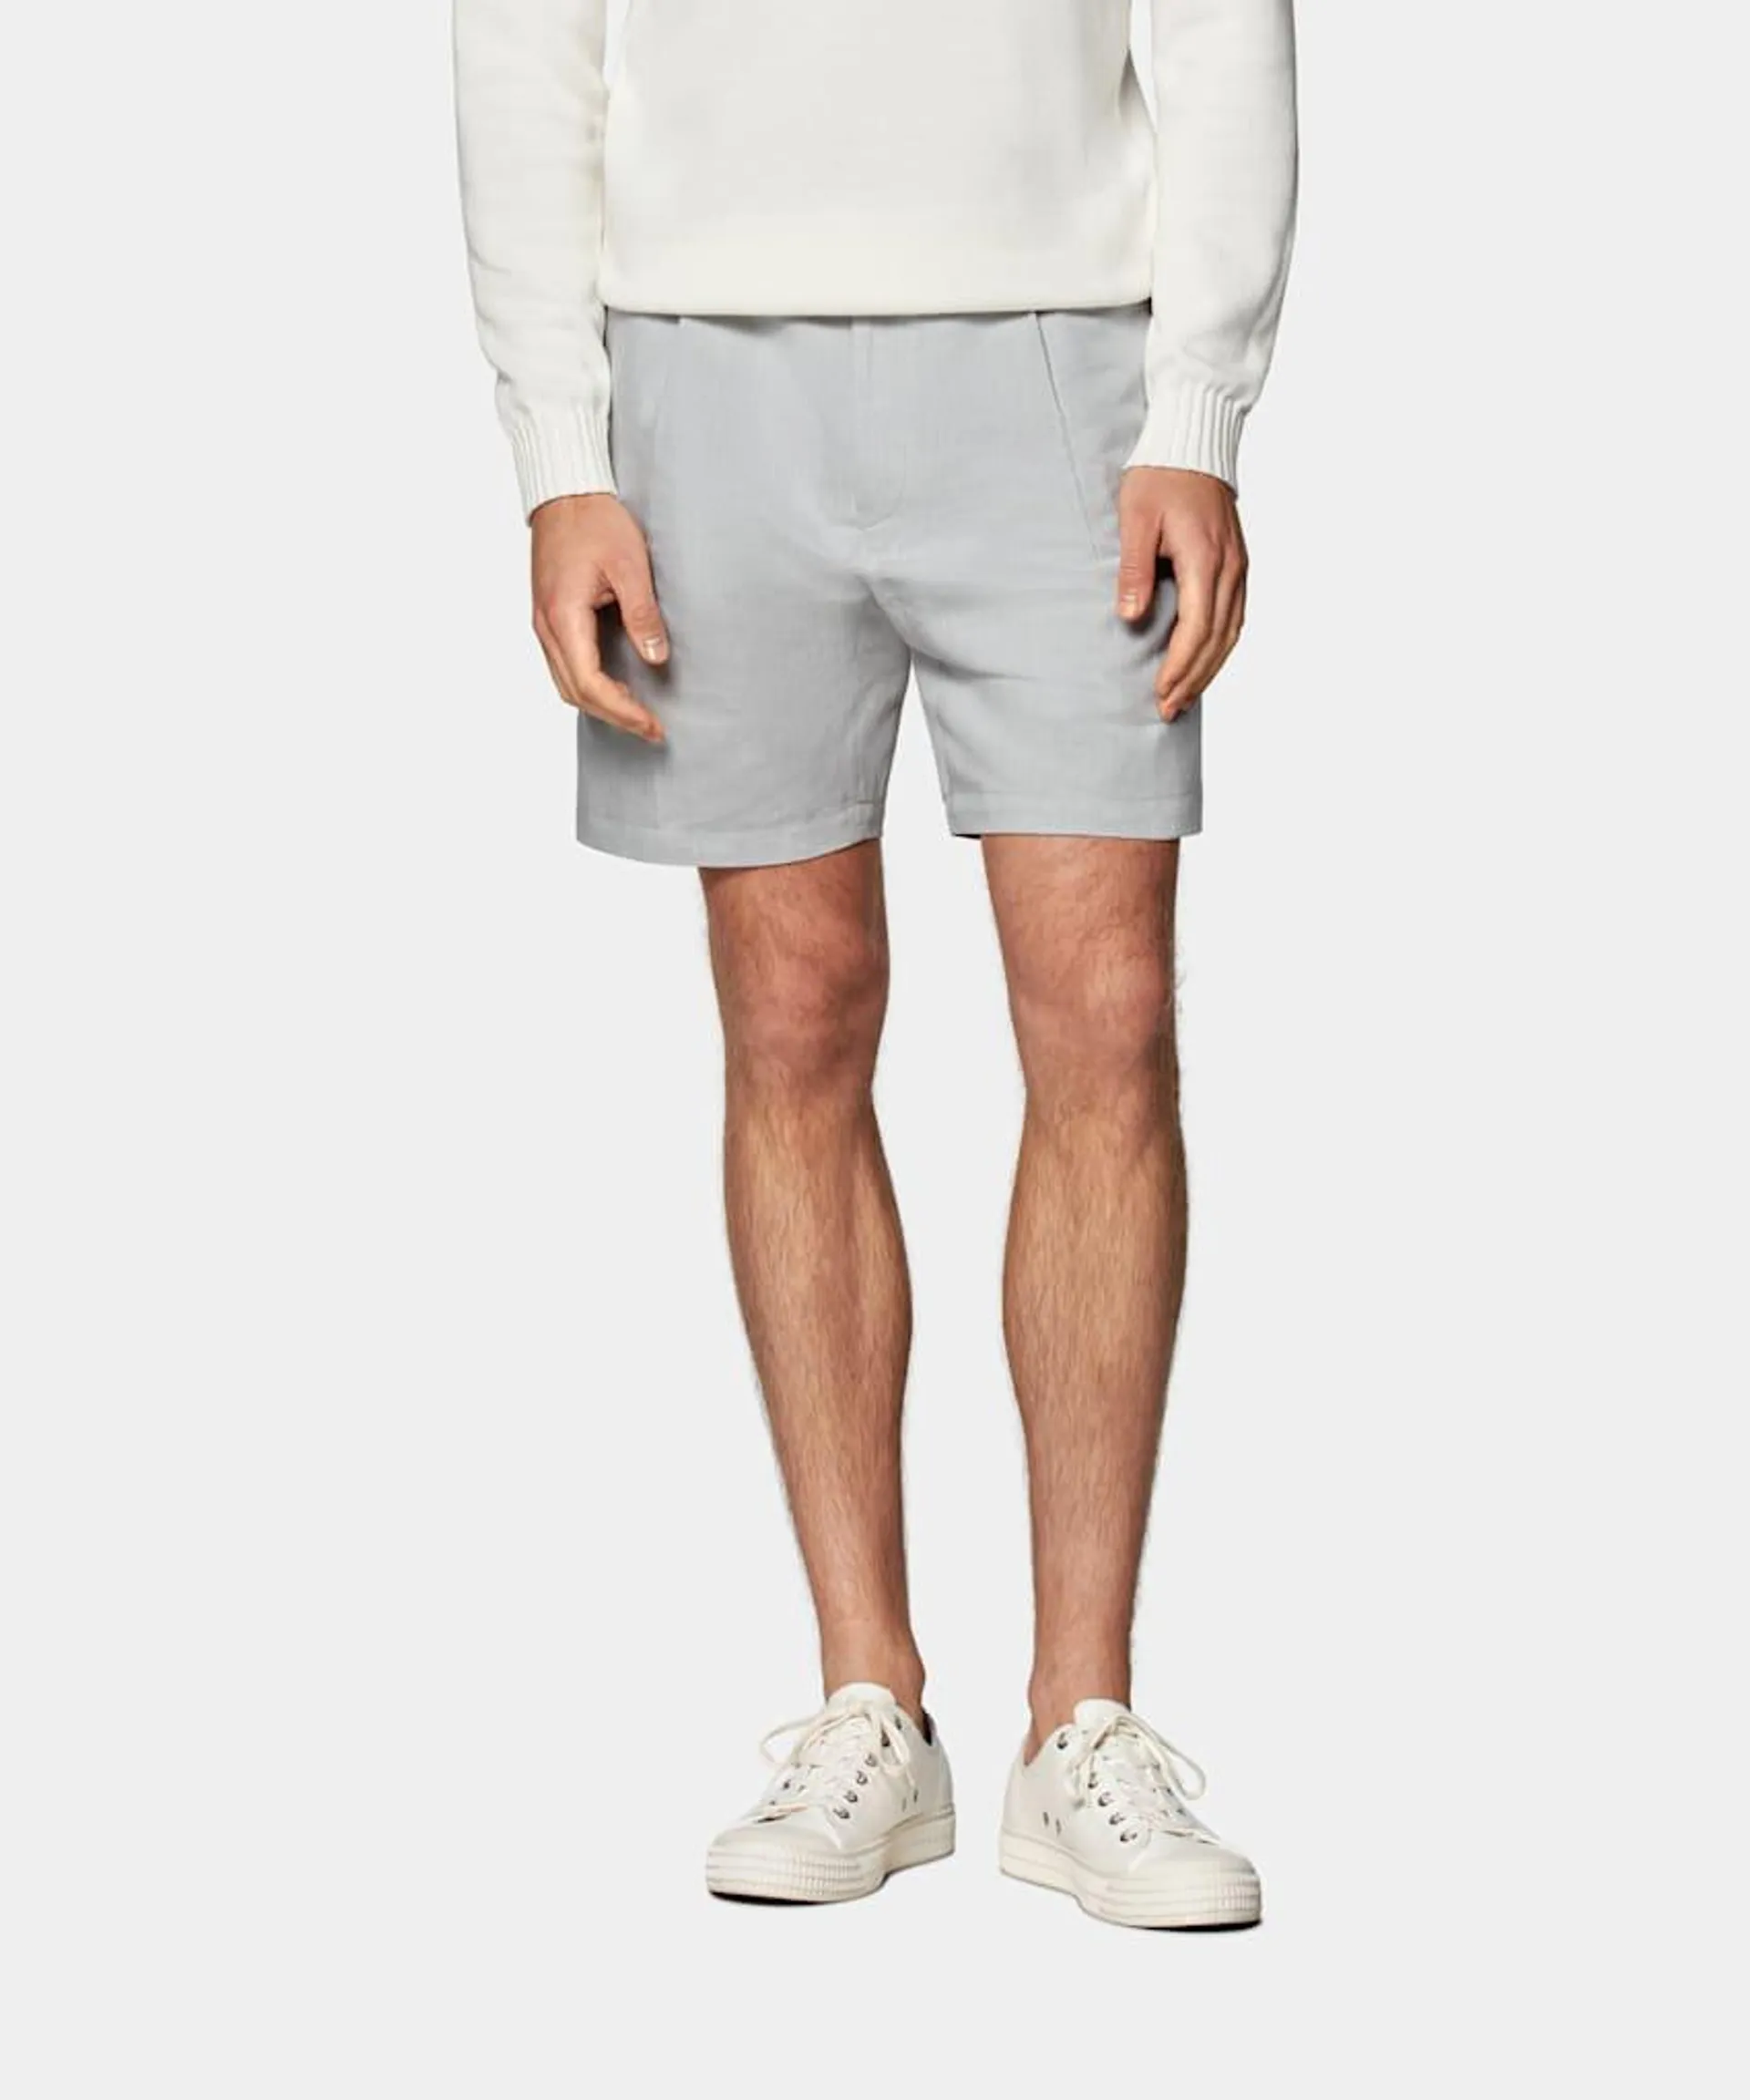 A classic go-to pair for any casual spring occasion, these pleated light grey shorts are cut slim to a mid-thigh length for a versatile, tailored look.